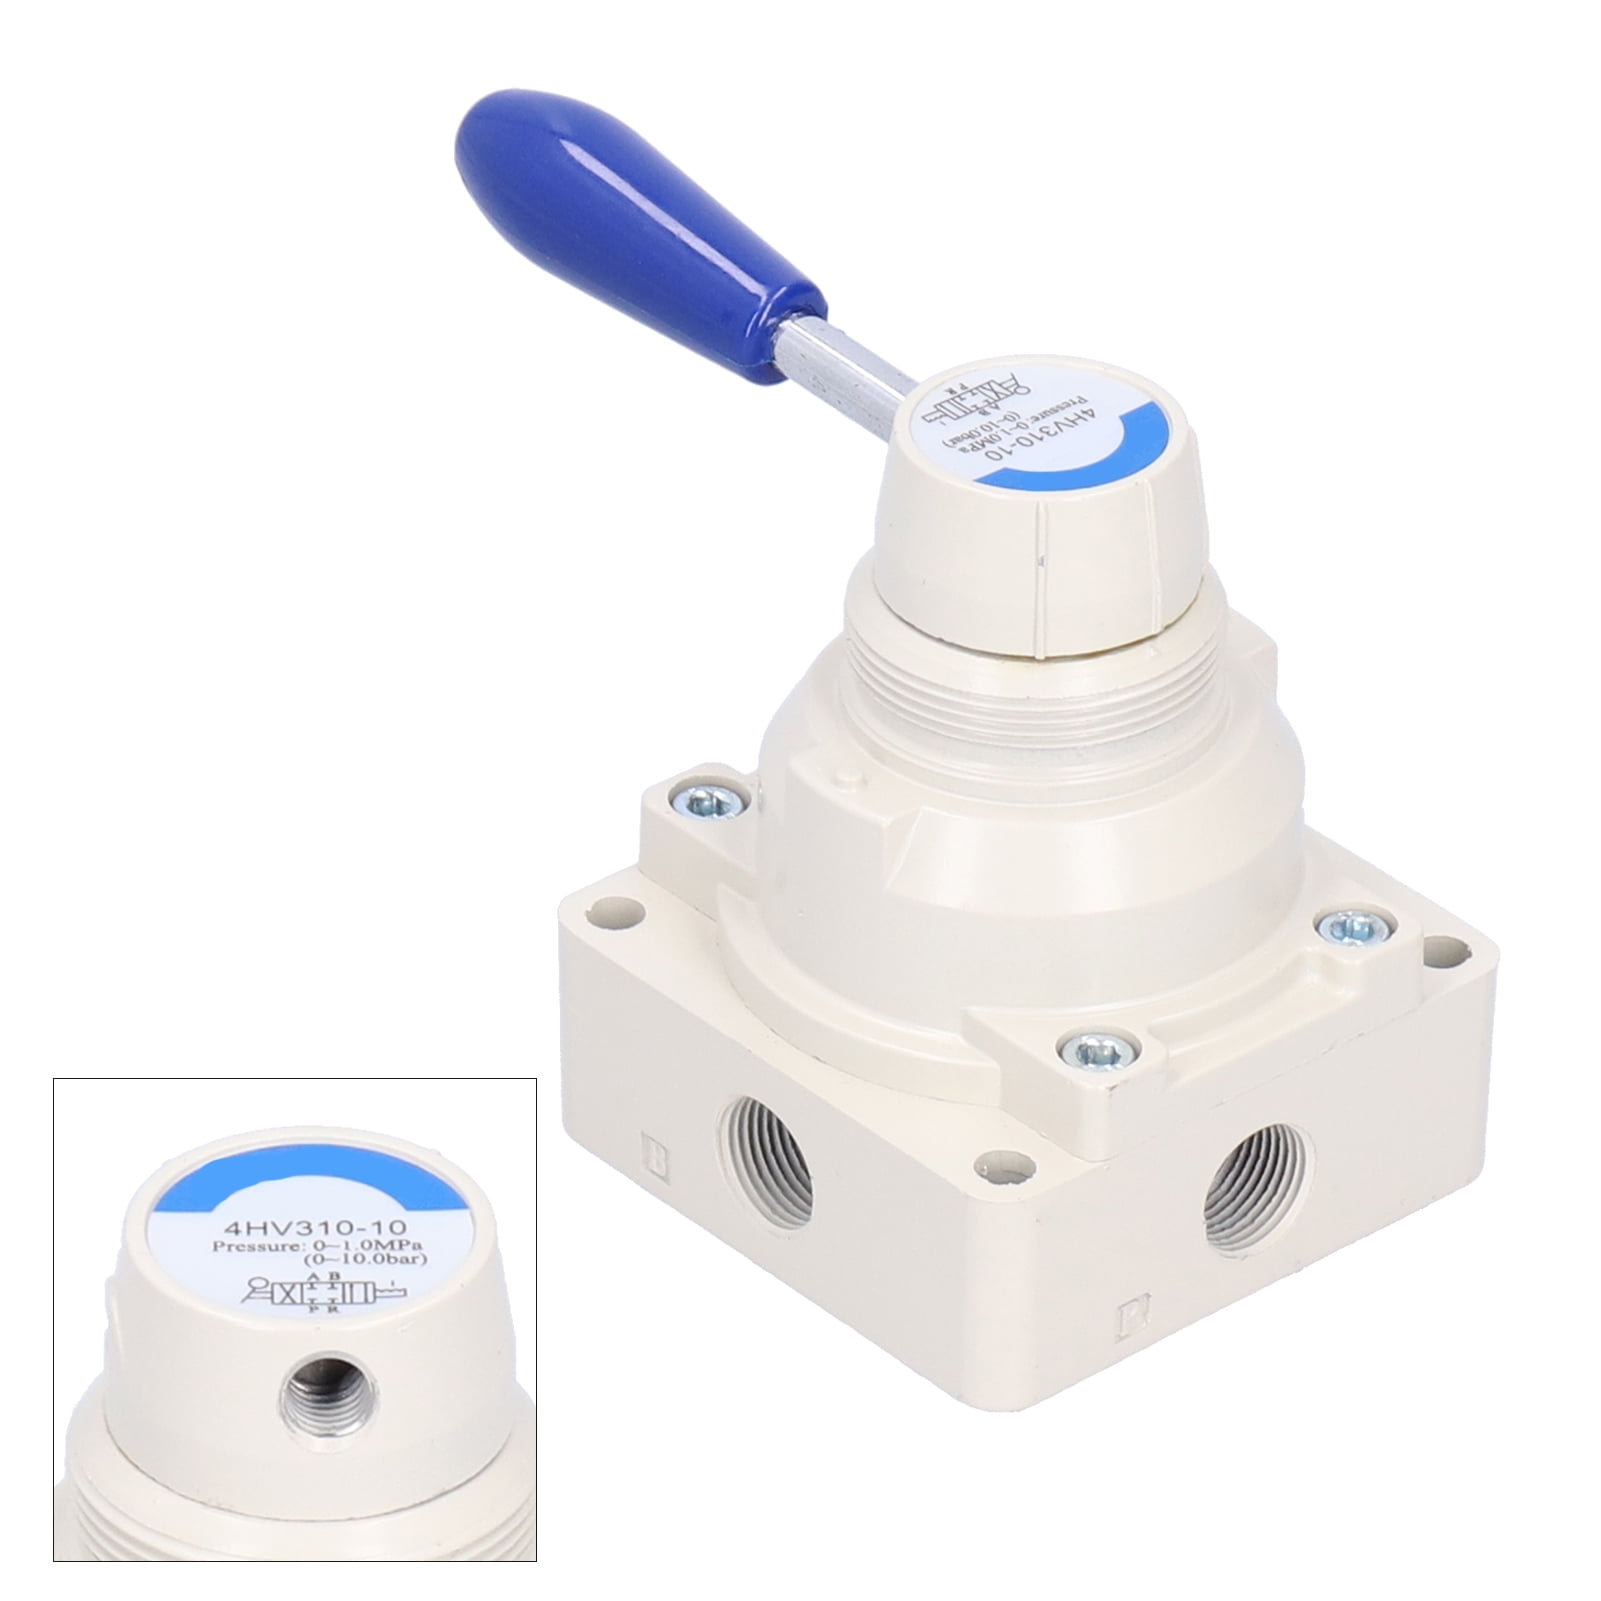 4HV230-06/4HV230-08 Hand Lever Valve Hand Operated Lever Air Valve Manual Control 3-Position 4-Way PT for Packaging 4HV230-08 1/4in 